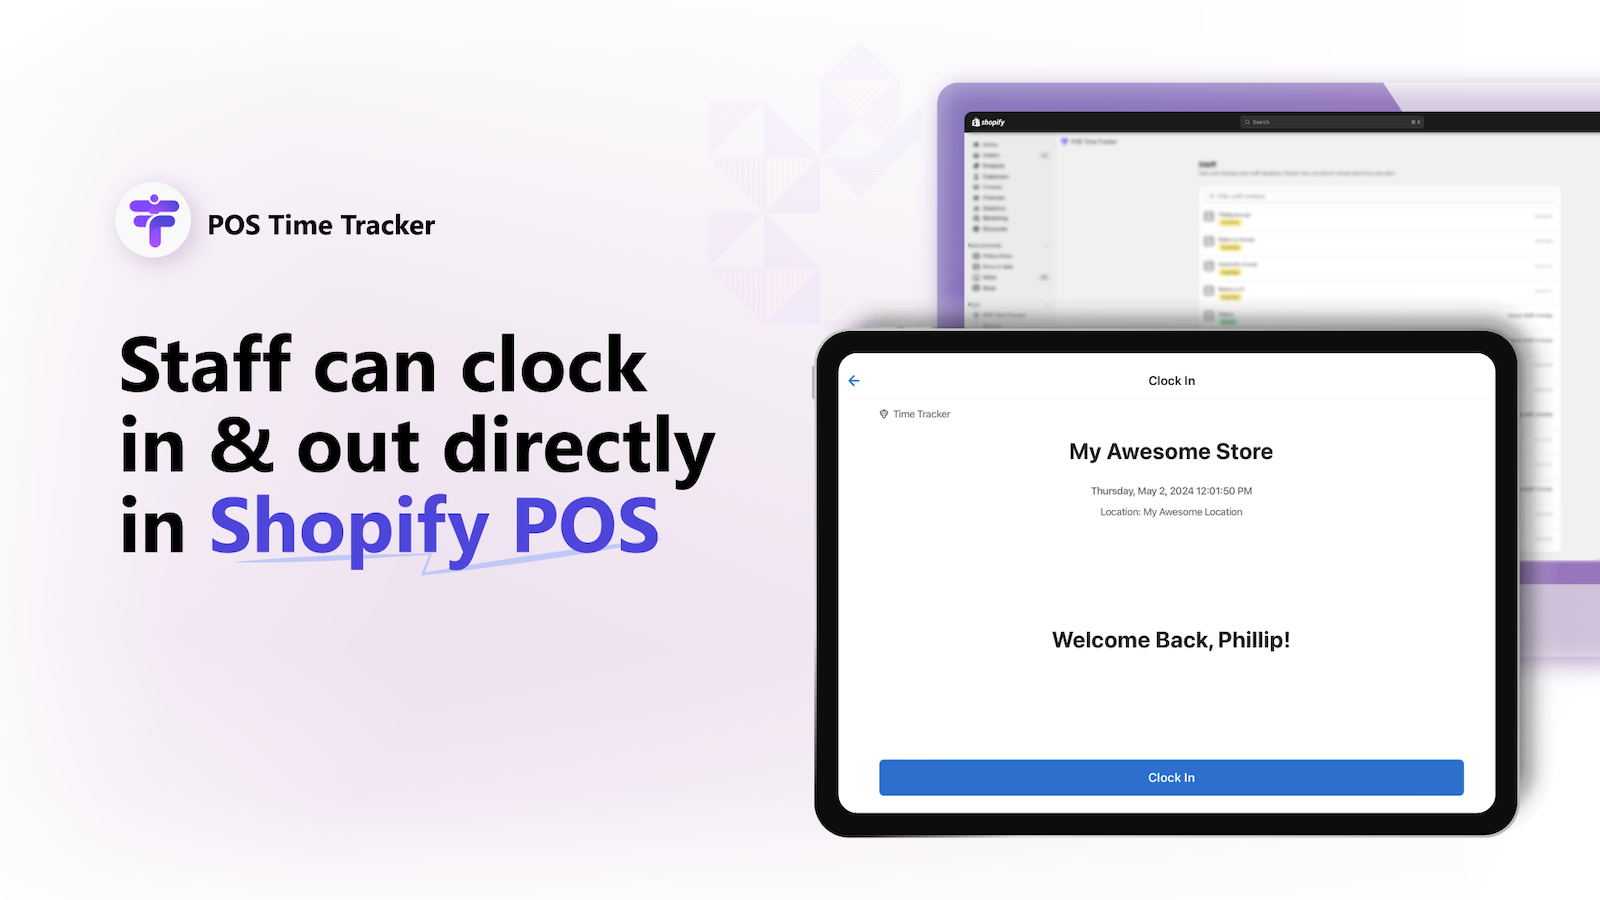 Staff can clock in & out directly in Shopify POS